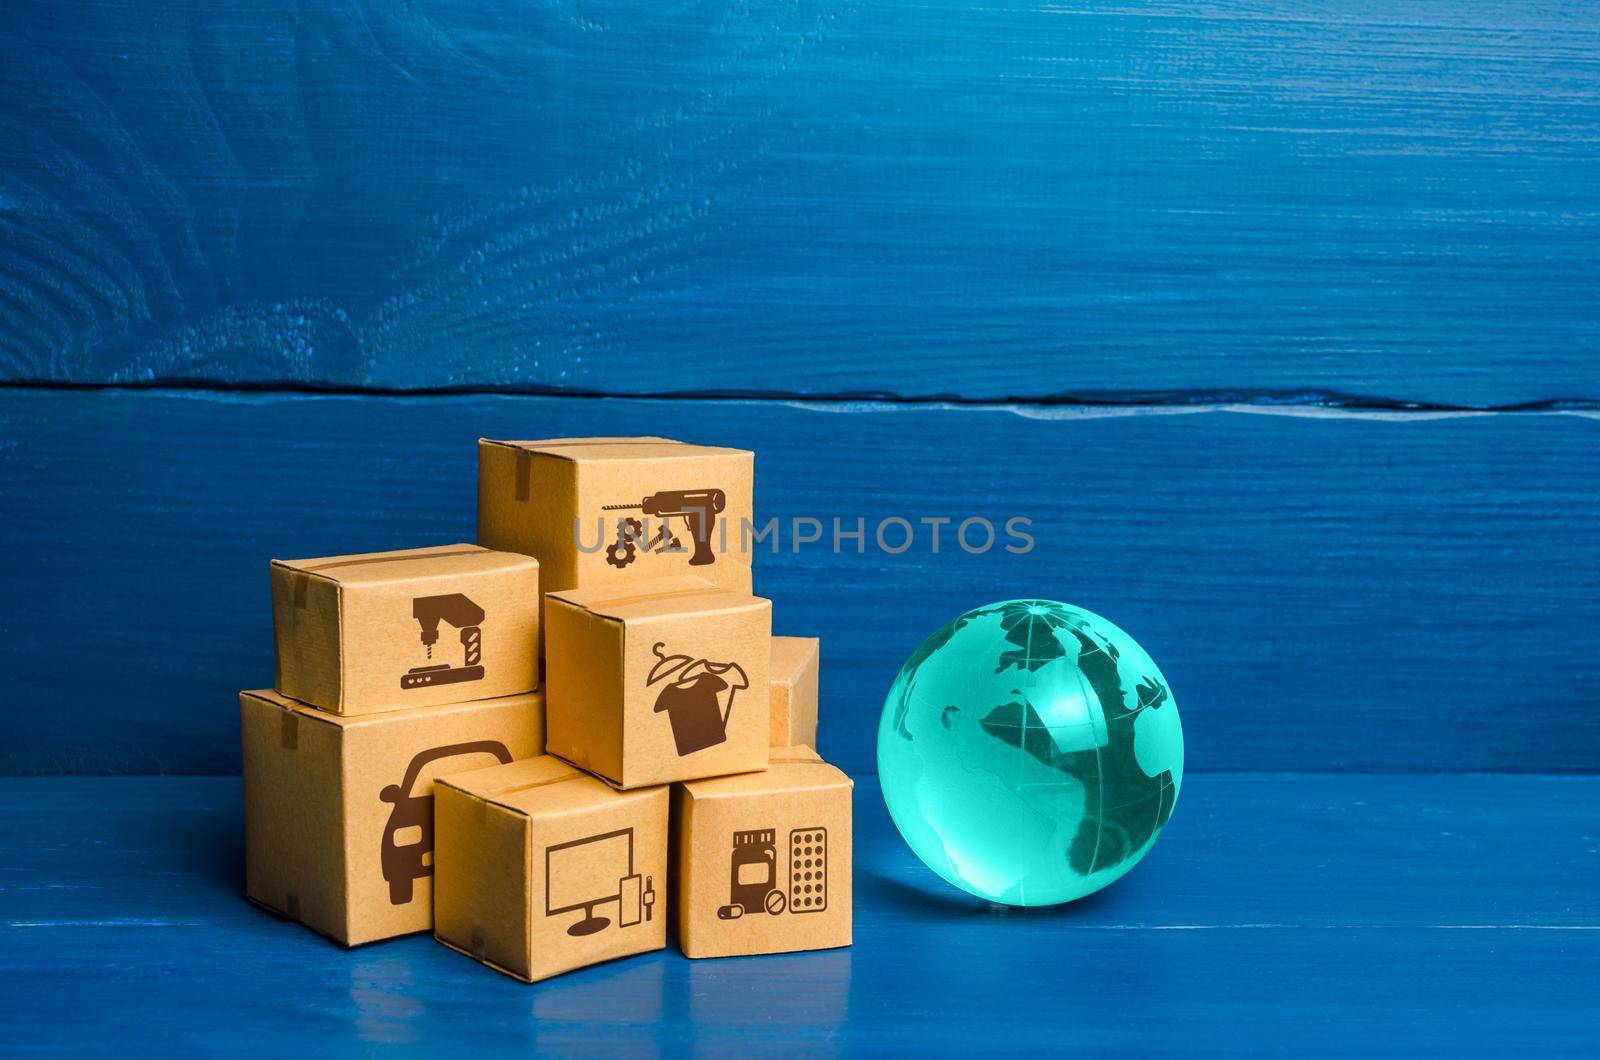 Glass globe and a bunch of boxes. Global business and world trade. Distribution of goods, import and export of products. Freight shipping delivery to new markets. Business commerce globalization.